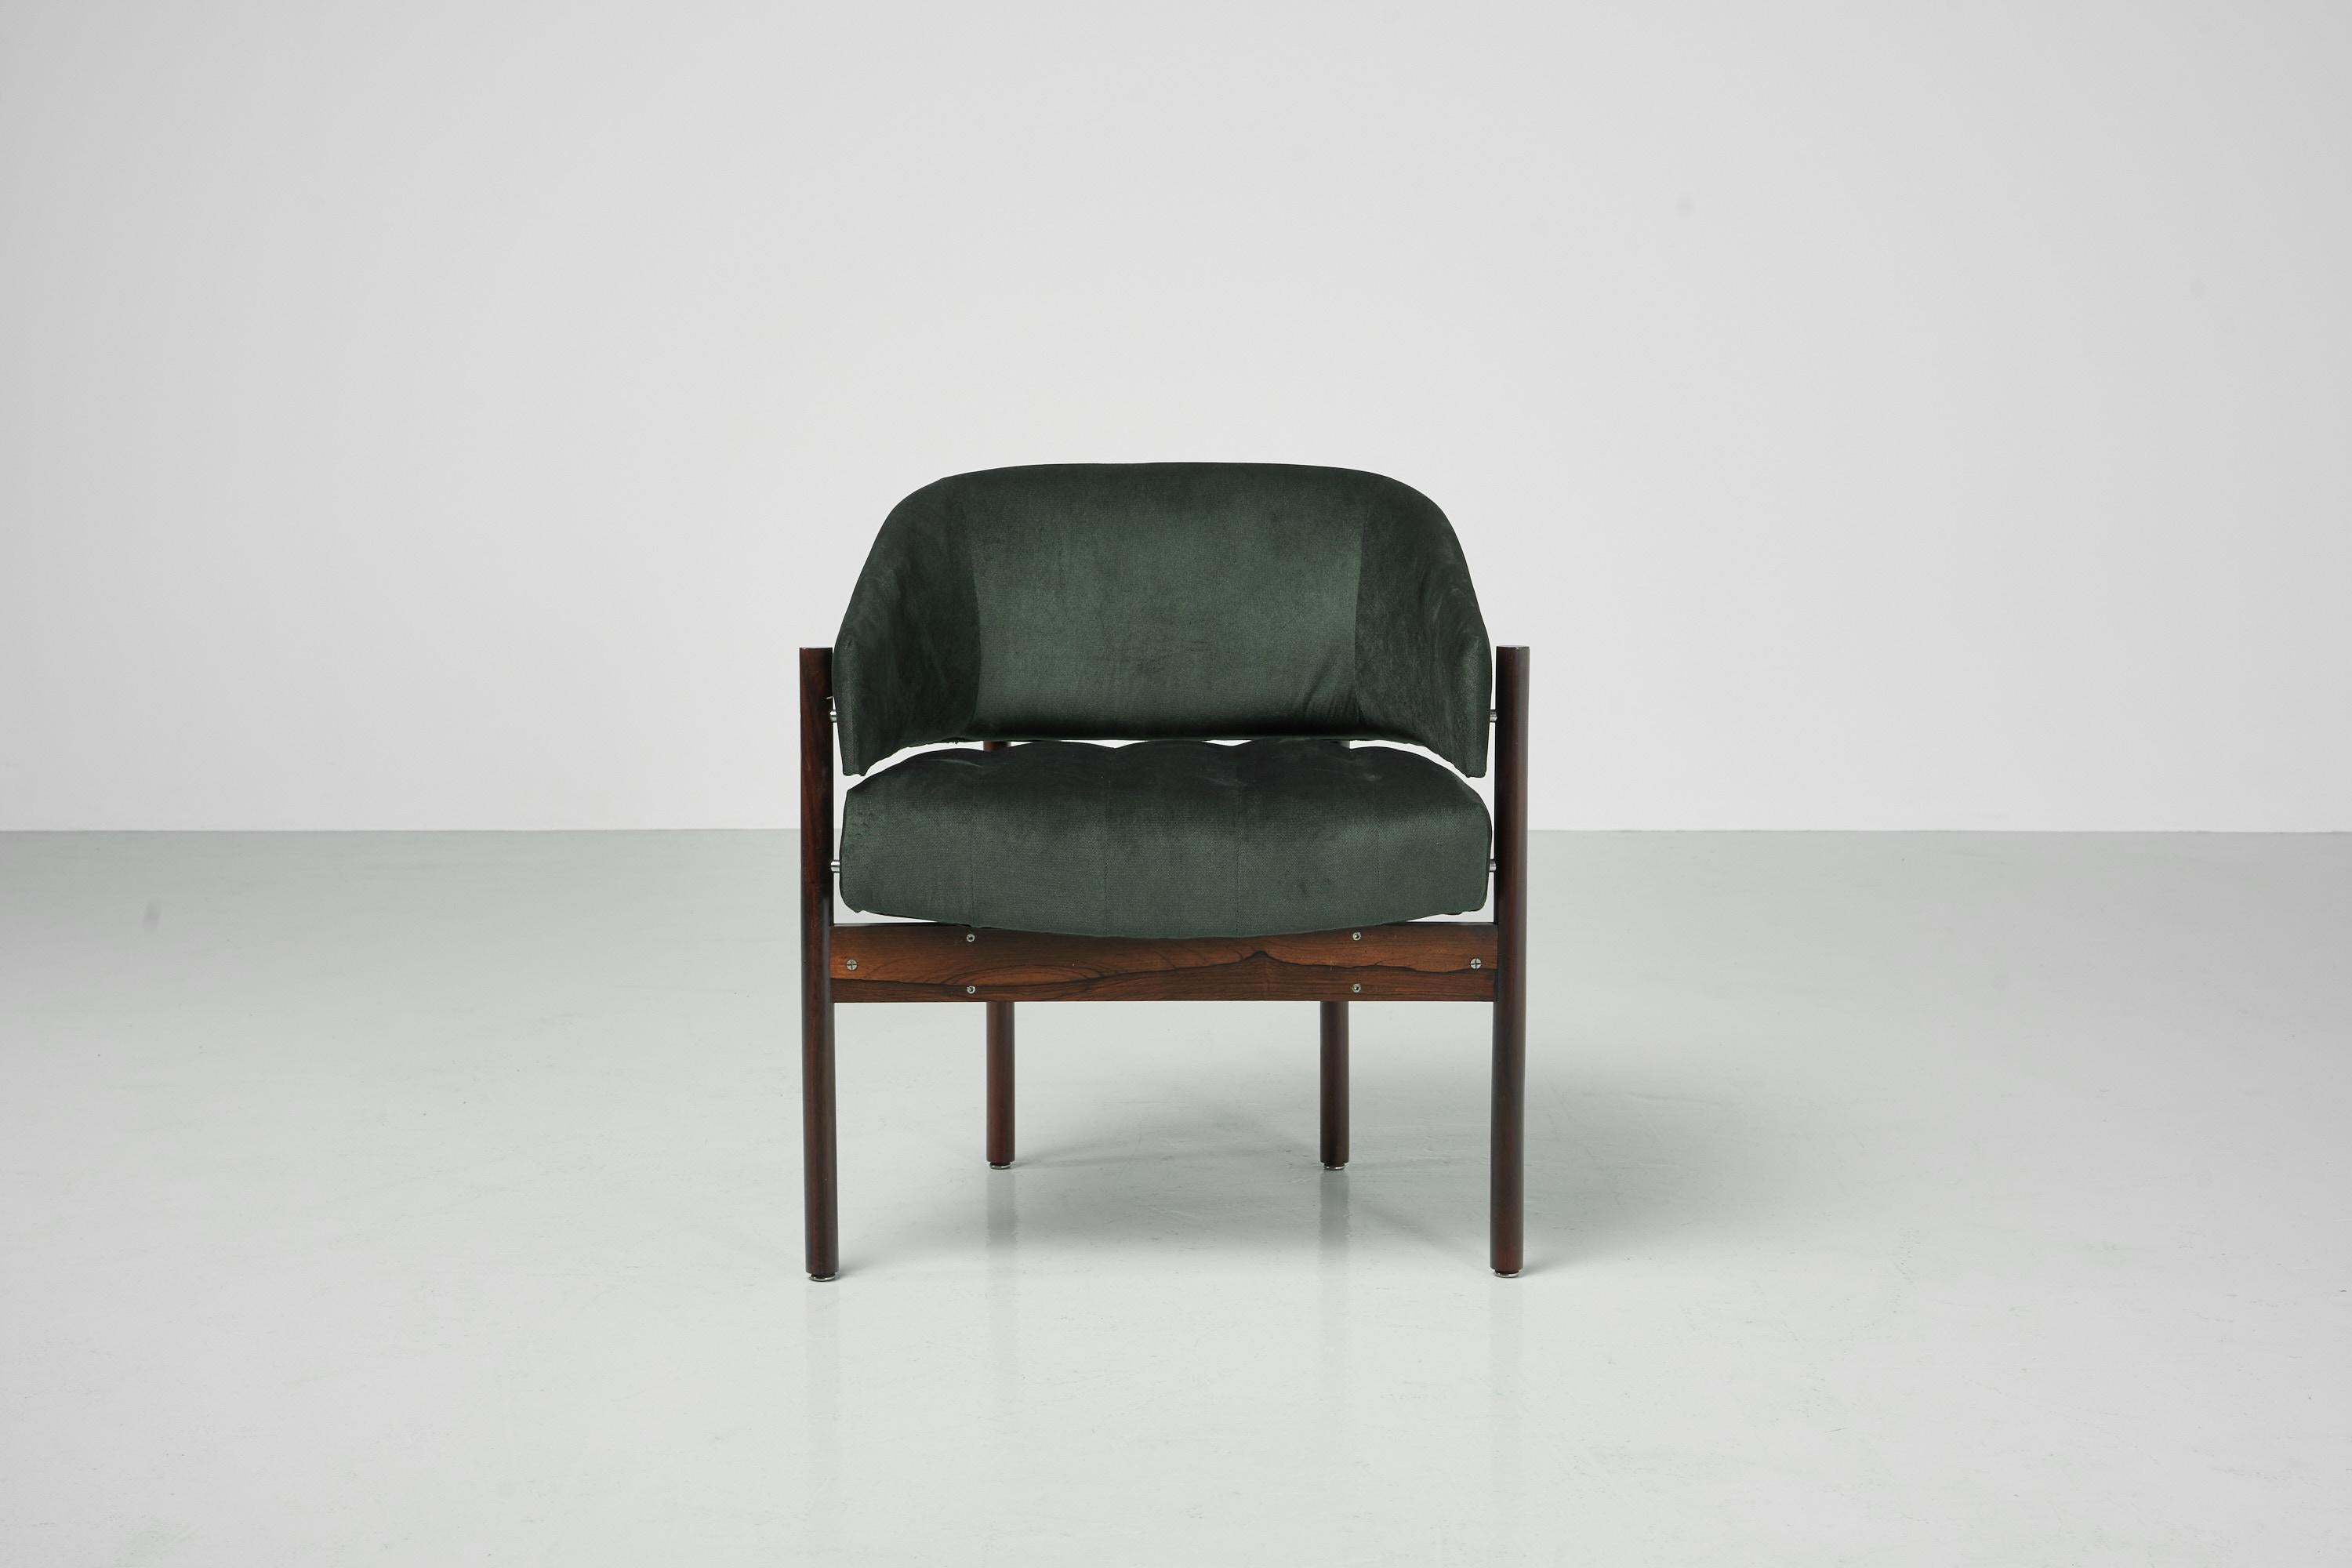 Comfortable so-called Senior armchair designed by Jorge Zalszupin and manufactured by his own company L'Atelier, Brazil 1959. The Senior chair is a minimalist and early design and was produced from the beginning in 1959 up till 1969. The chair has